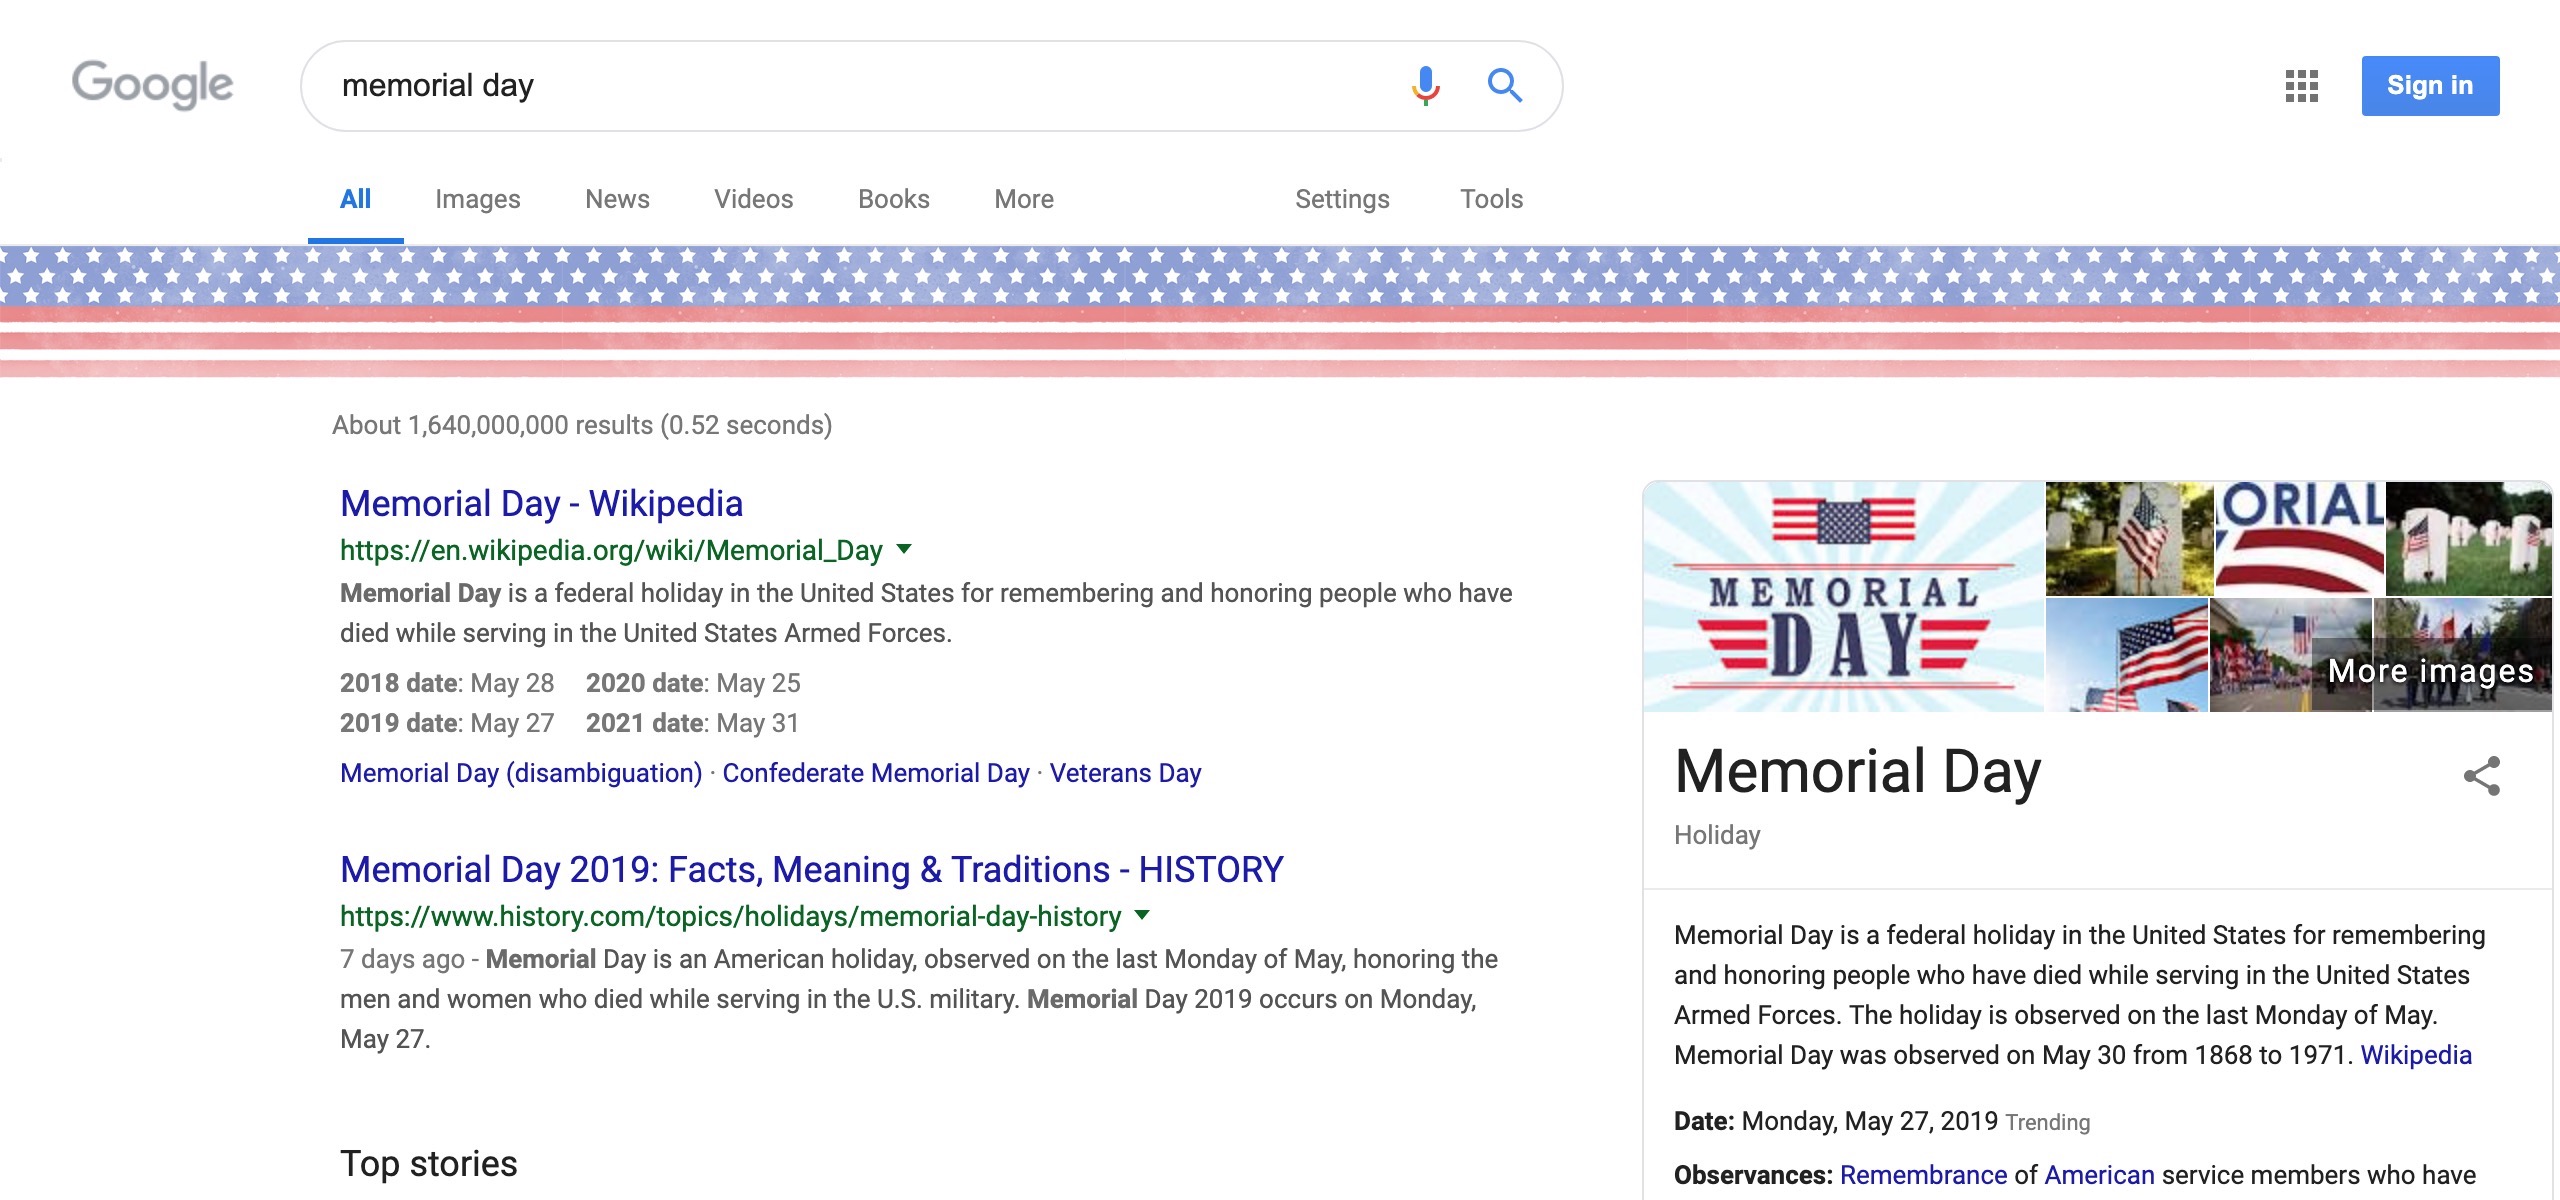 https://9to5google.com/wp-content/uploads/sites/4/2019/05/google-doodle-Memorial-Day-search.jpg